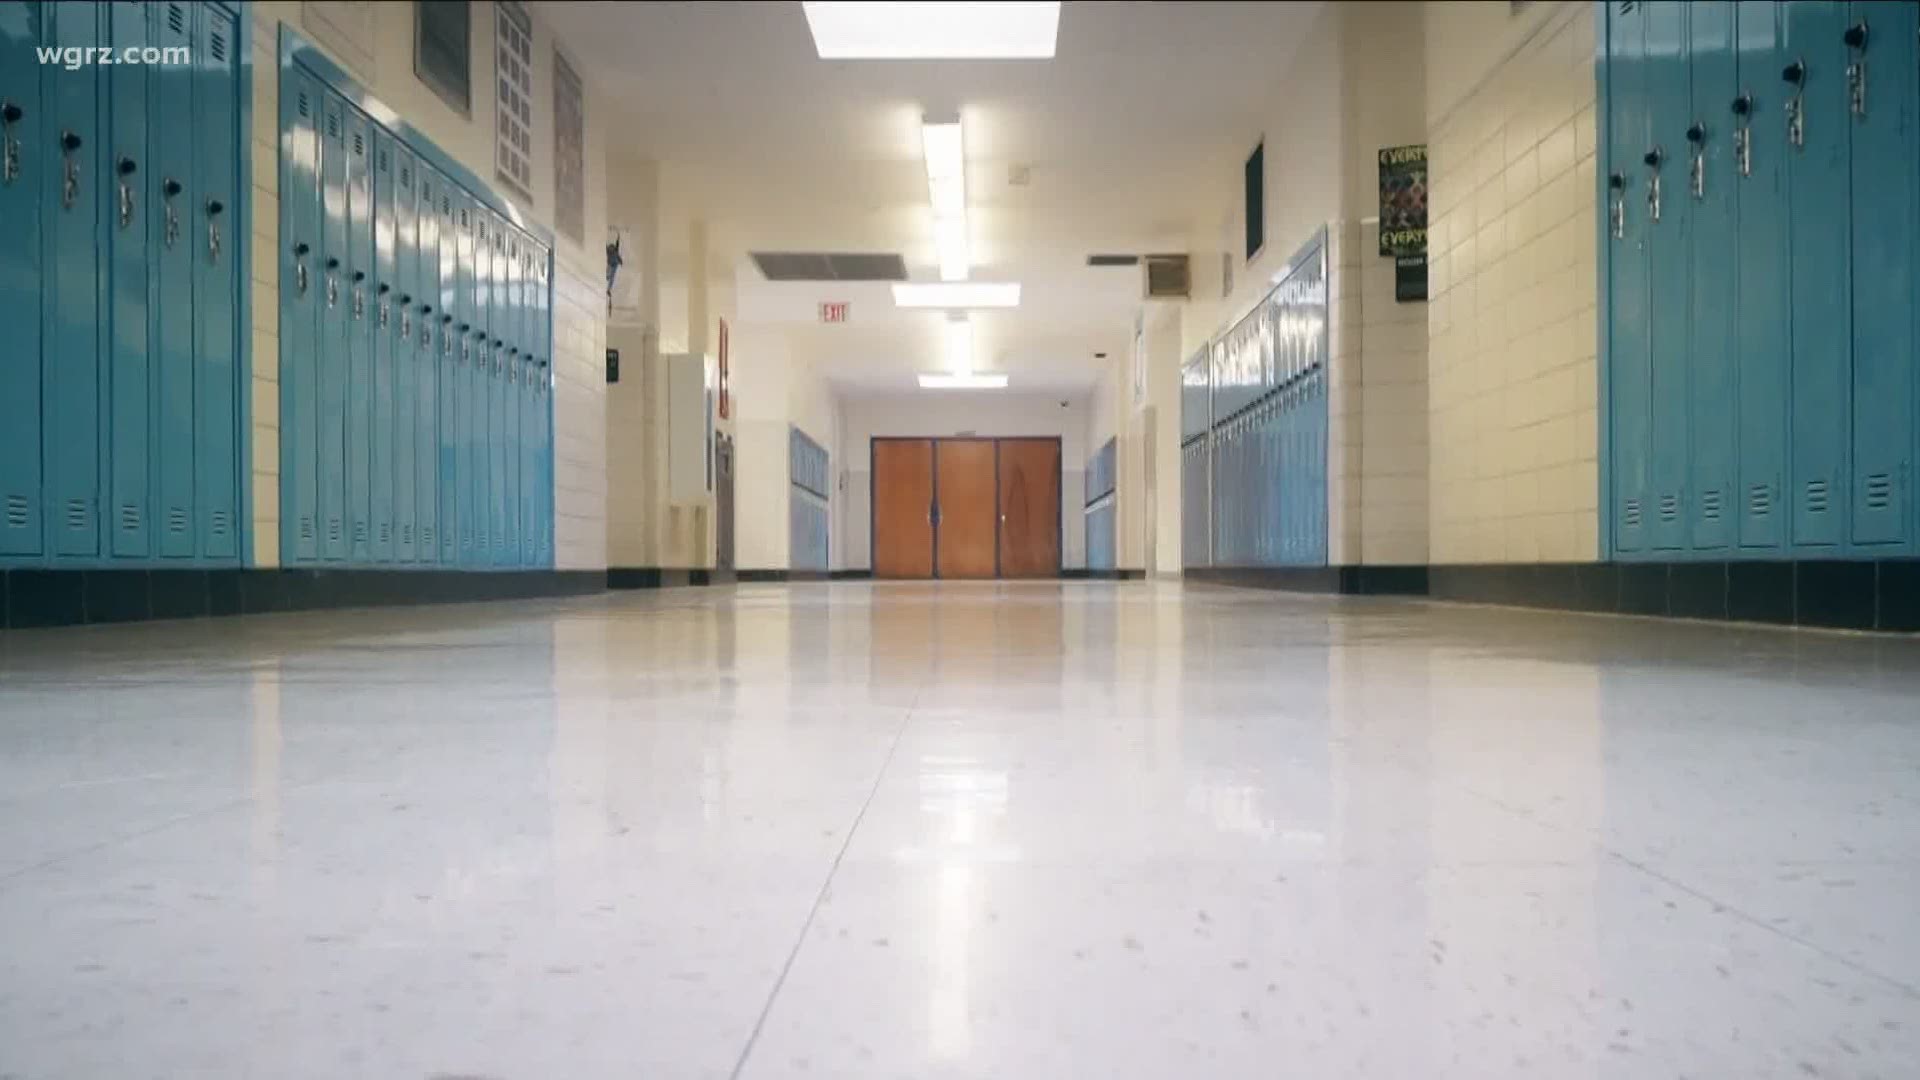 School districts across Western New York had until tonight to submit their reopening plans to the state. 
Buffalo Public Schools released theirs just hours ago.